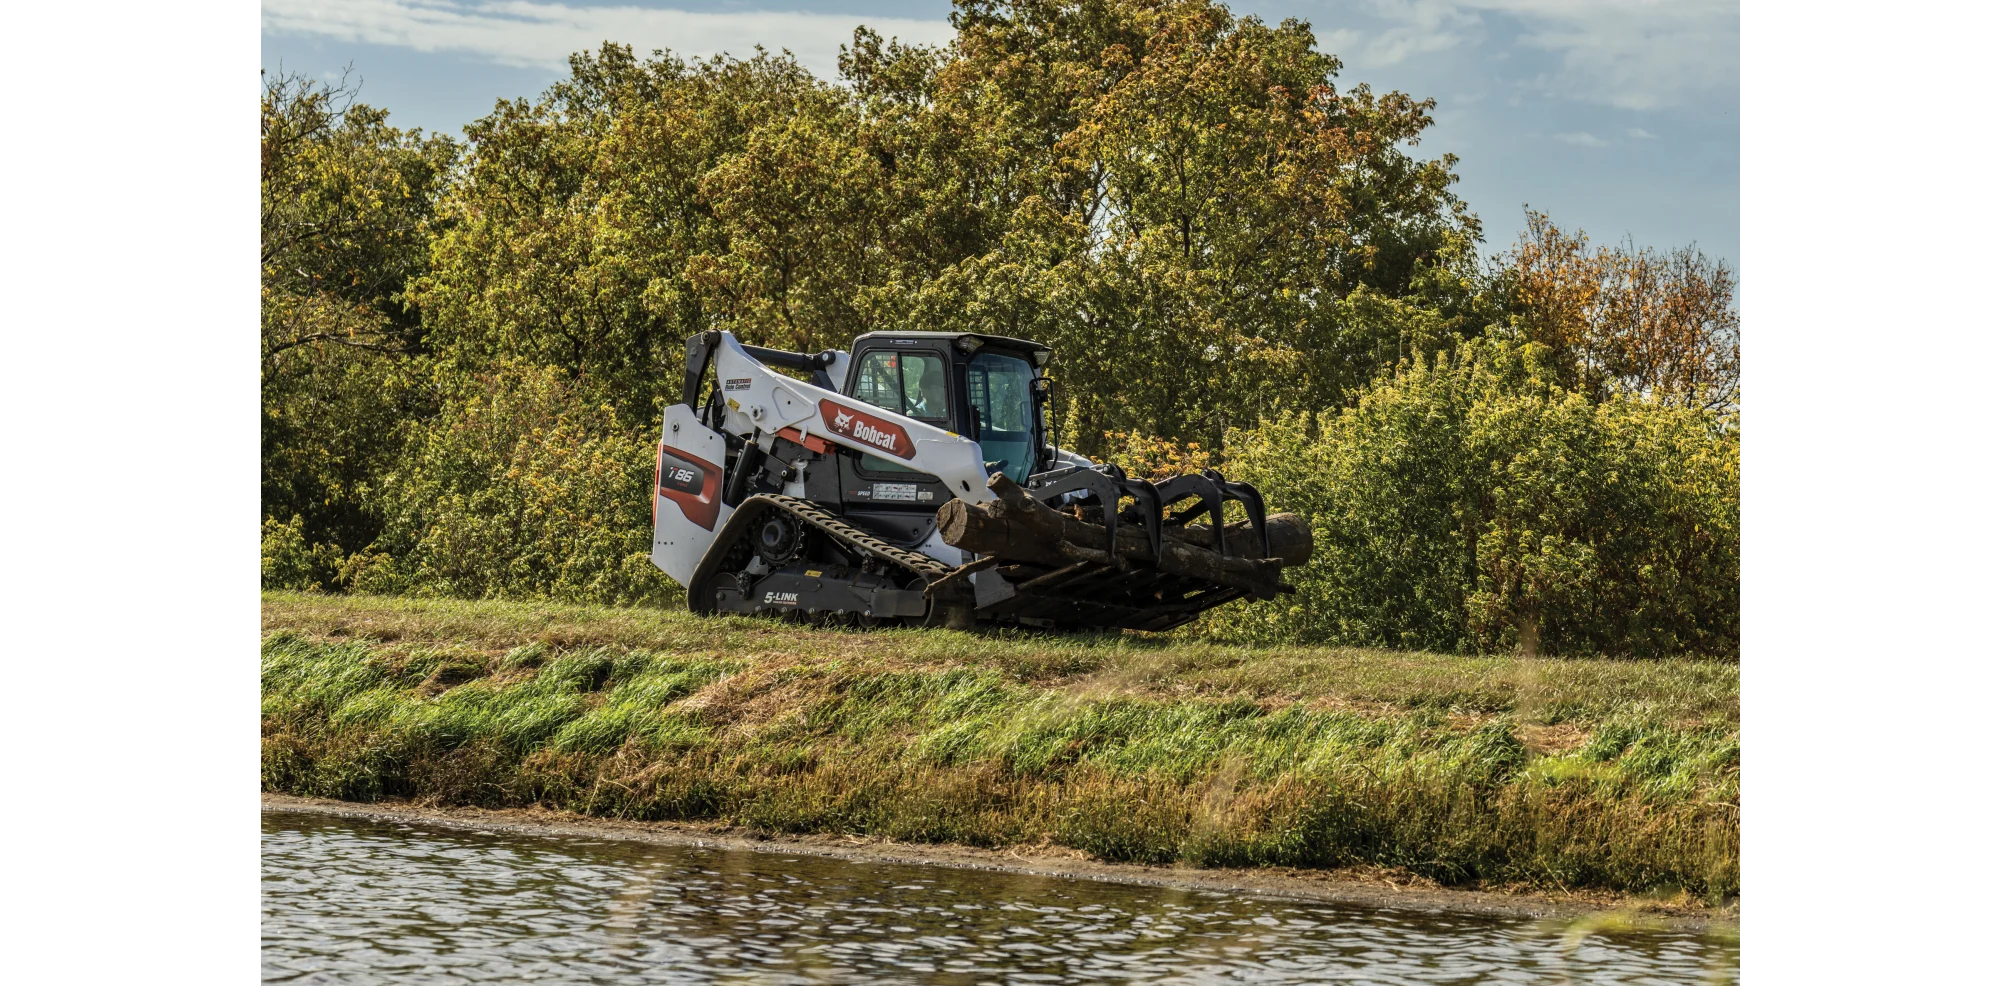 Browse Specs and more for the Bobcat T86 Compact Track Loader - Bobcat of North Texas